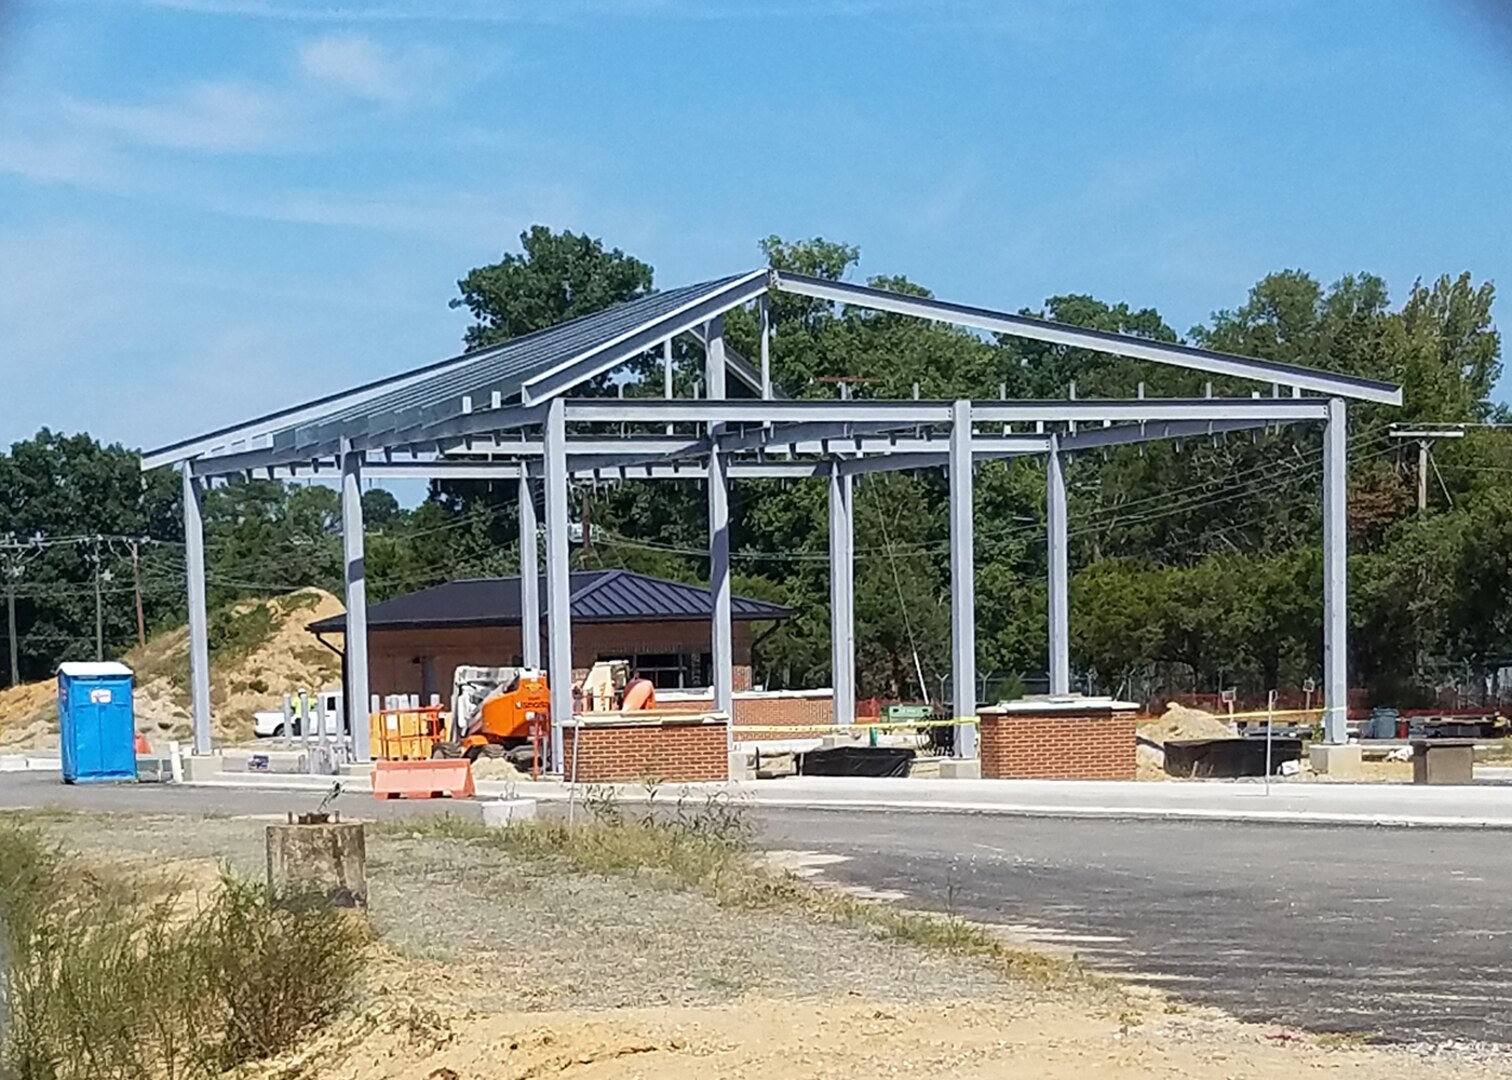 Construction on new east gate at DSCR on schedule for spring opening